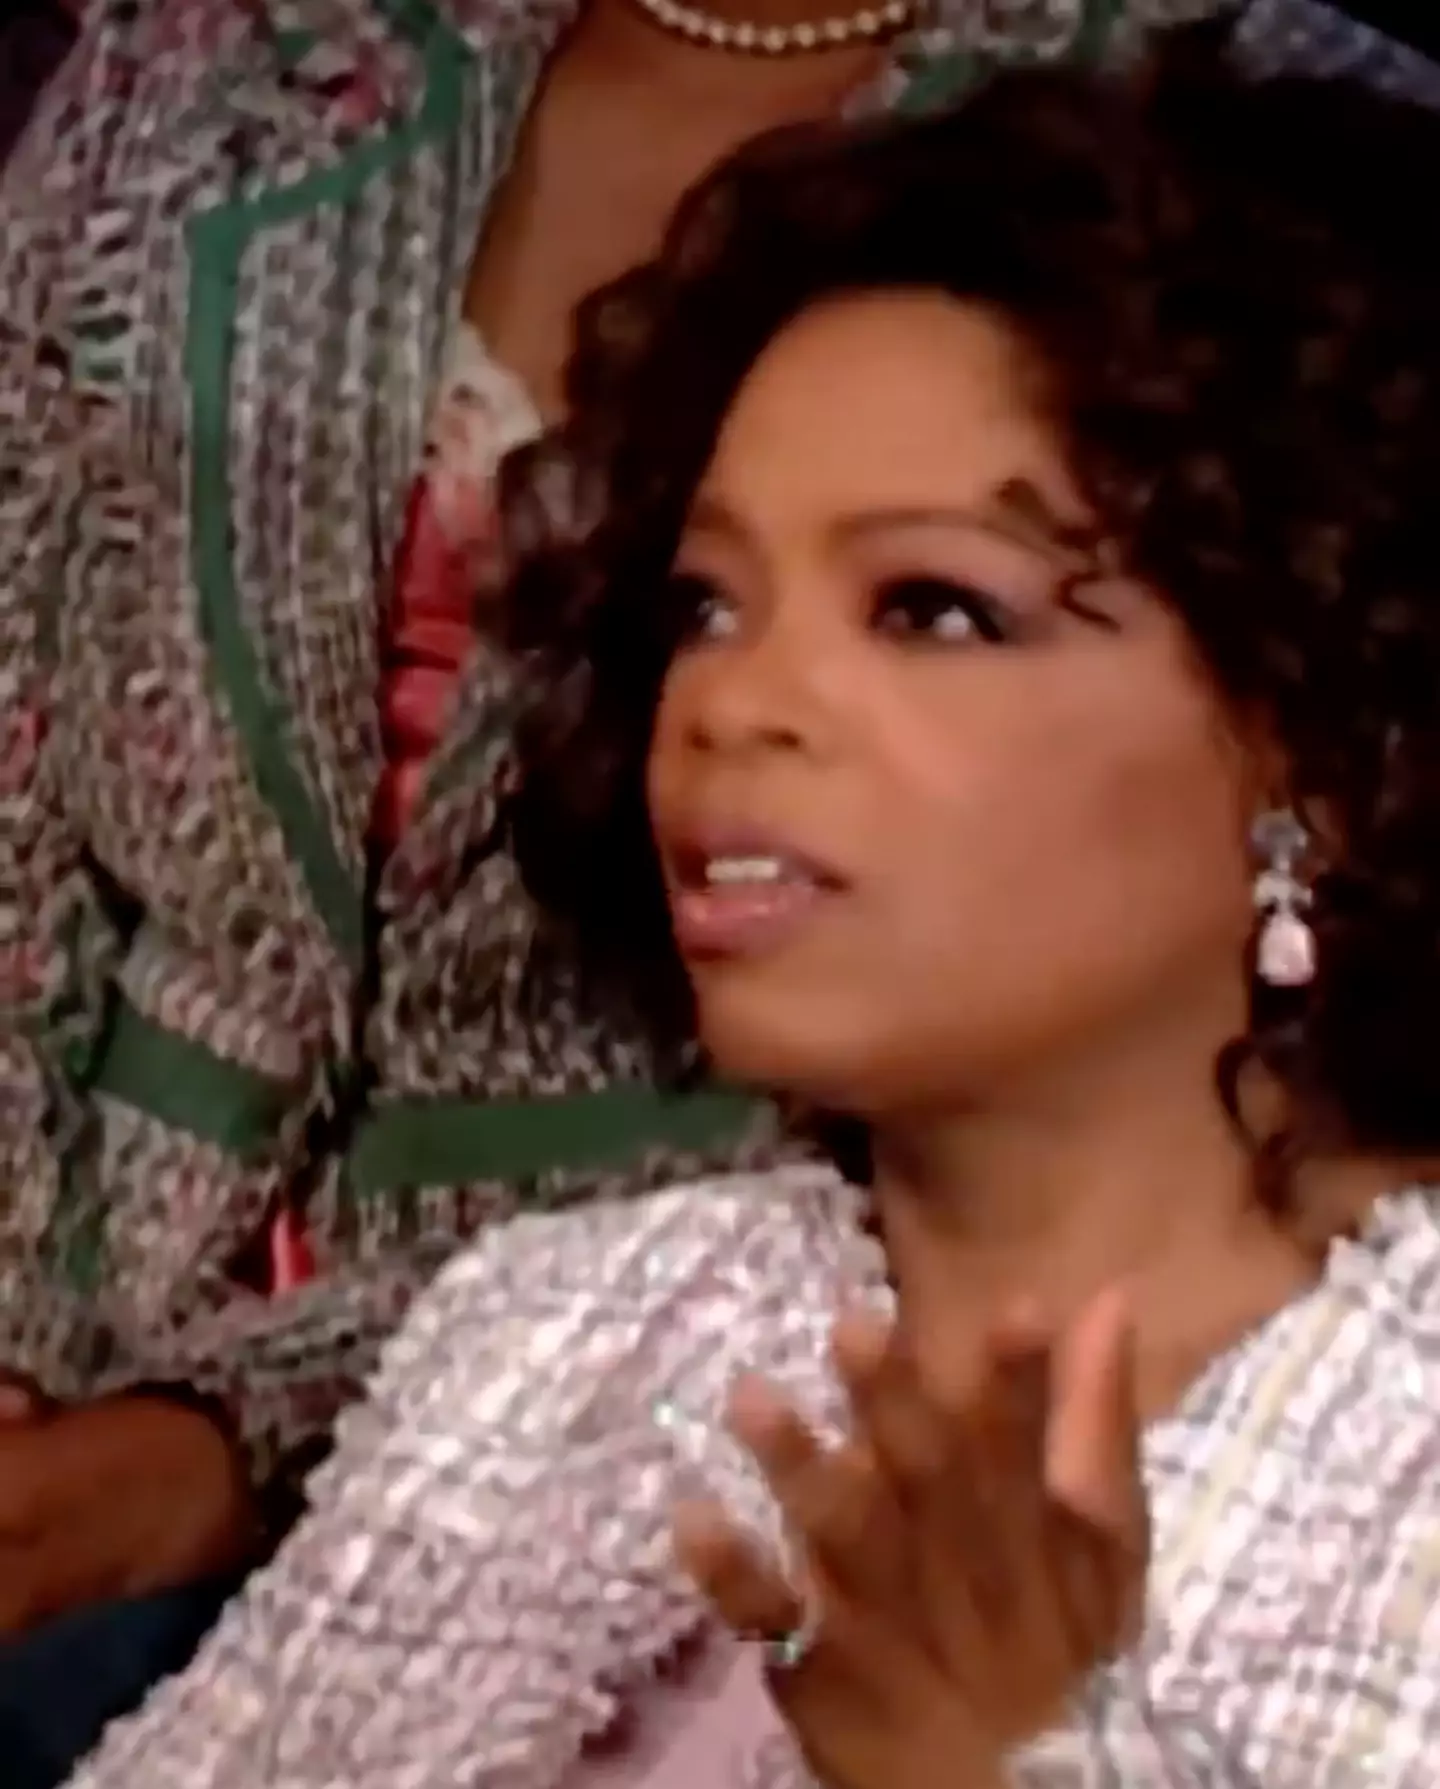 Oprah also forgot the words to We Belong Together by Mariah Carey (